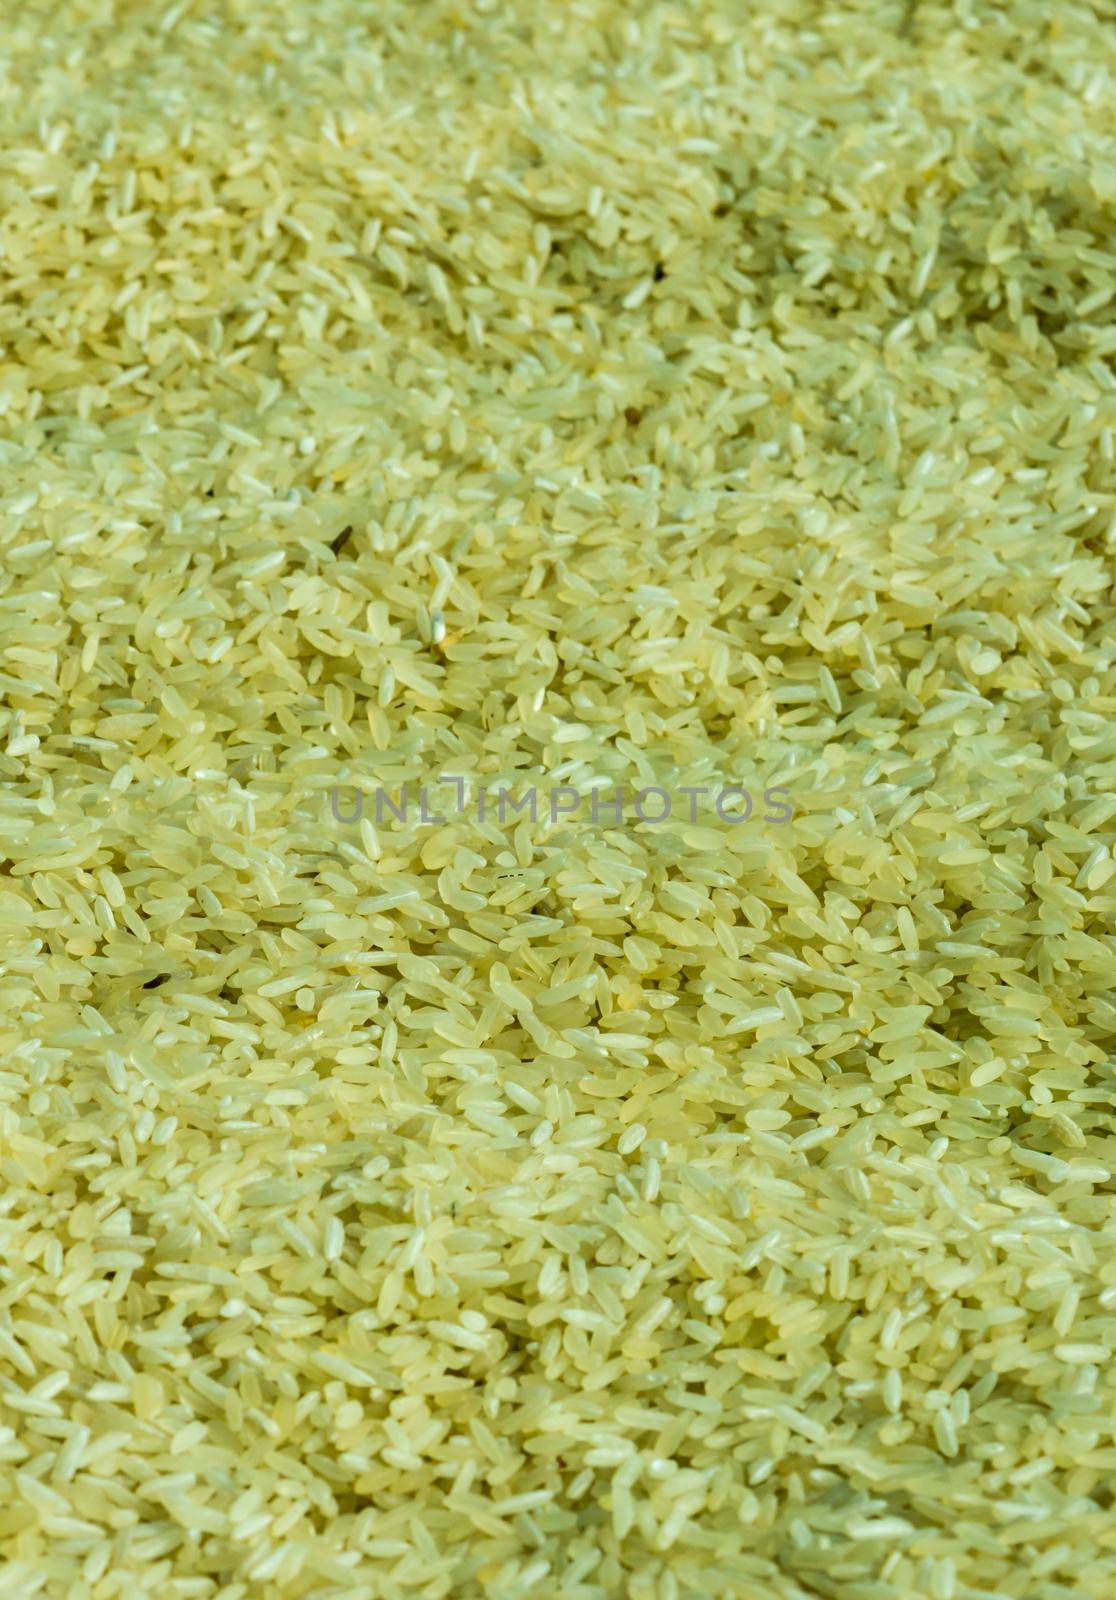 Full Frame Shot Of Rice Grain in Sunlight. Food Background. High Angle view. Flat Lay. by sudiptabhowmick